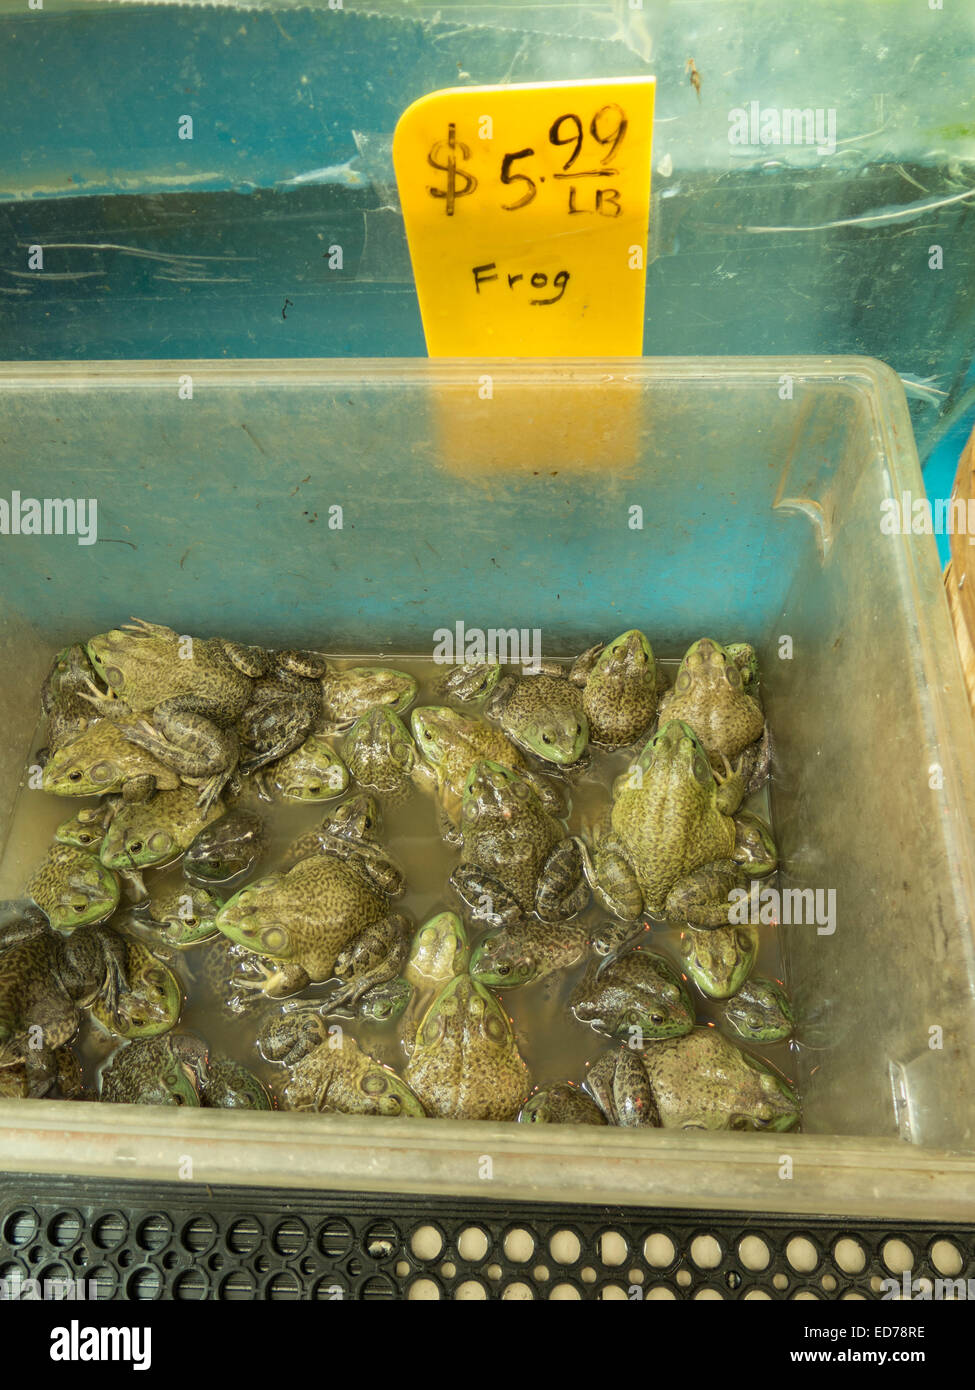 Seafood department in Asian market in Albany, New York sells live frogs by the pound. Stock Photo